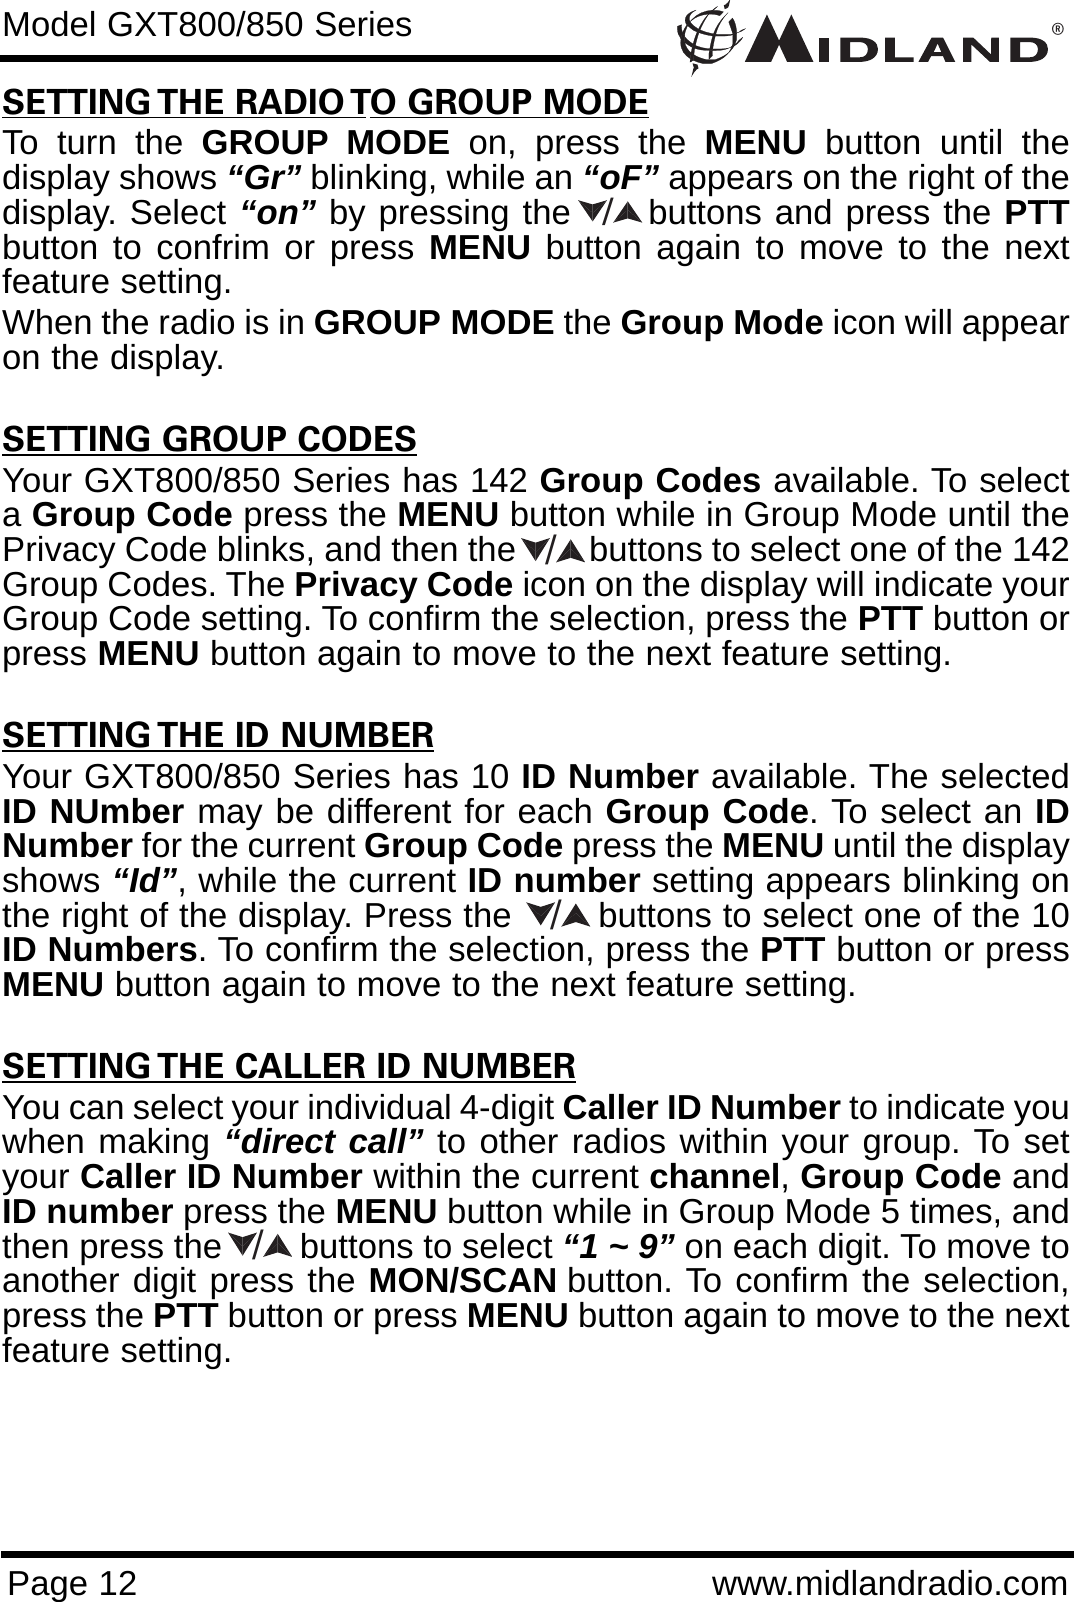 ®Page 12 www.midlandradio.comSETTING THE RADIO TO GROUP MODETo turn the GROUP MODE on, press the MENU button until thedisplay shows “Gr” blinking, while an “oF” appears on the right of thedisplay. Select “on” by pressing the      buttons and press the PTTbutton to confrim or press MENU button again to move to the nextfeature setting. When the radio is in GROUP MODE the Group Mode icon will appearon the display.SETTING GROUP CODESYour GXT800/850 Series has 142 Group Codes available. To selecta Group Code press the MENU button while in Group Mode until thePrivacy Code blinks, and then the        buttons to select one of the 142Group Codes. The Privacy Code icon on the display will indicate yourGroup Code setting. To confirm the selection, press the PTT button orpress MENU button again to move to the next feature setting.SETTING THE ID NUMBERYour GXT800/850 Series has 10 ID Number available. The selectedID NUmber may be different for each Group Code. To select an IDNumber for the current Group Code press the MENU until the displayshows “Id”, while the current ID number setting appears blinking onthe right of the display. Press the        buttons to select one of the 10ID Numbers. To confirm the selection, press the PTT button or pressMENU button again to move to the next feature setting.SETTING THE CALLER ID NUMBERYou can select your individual 4-digit Caller ID Number to indicate youwhen making “direct call” to other radios within your group. To setyour Caller ID Number within the current channel, Group Code andID number press the MENU button while in Group Mode 5 times, andthen press the        buttons to select “1 ~ 9” on each digit. To move toanother digit press the MON/SCAN button. To confirm the selection,press the PTT button or press MENU button again to move to the nextfeature setting. Model GXT800/850 Series////